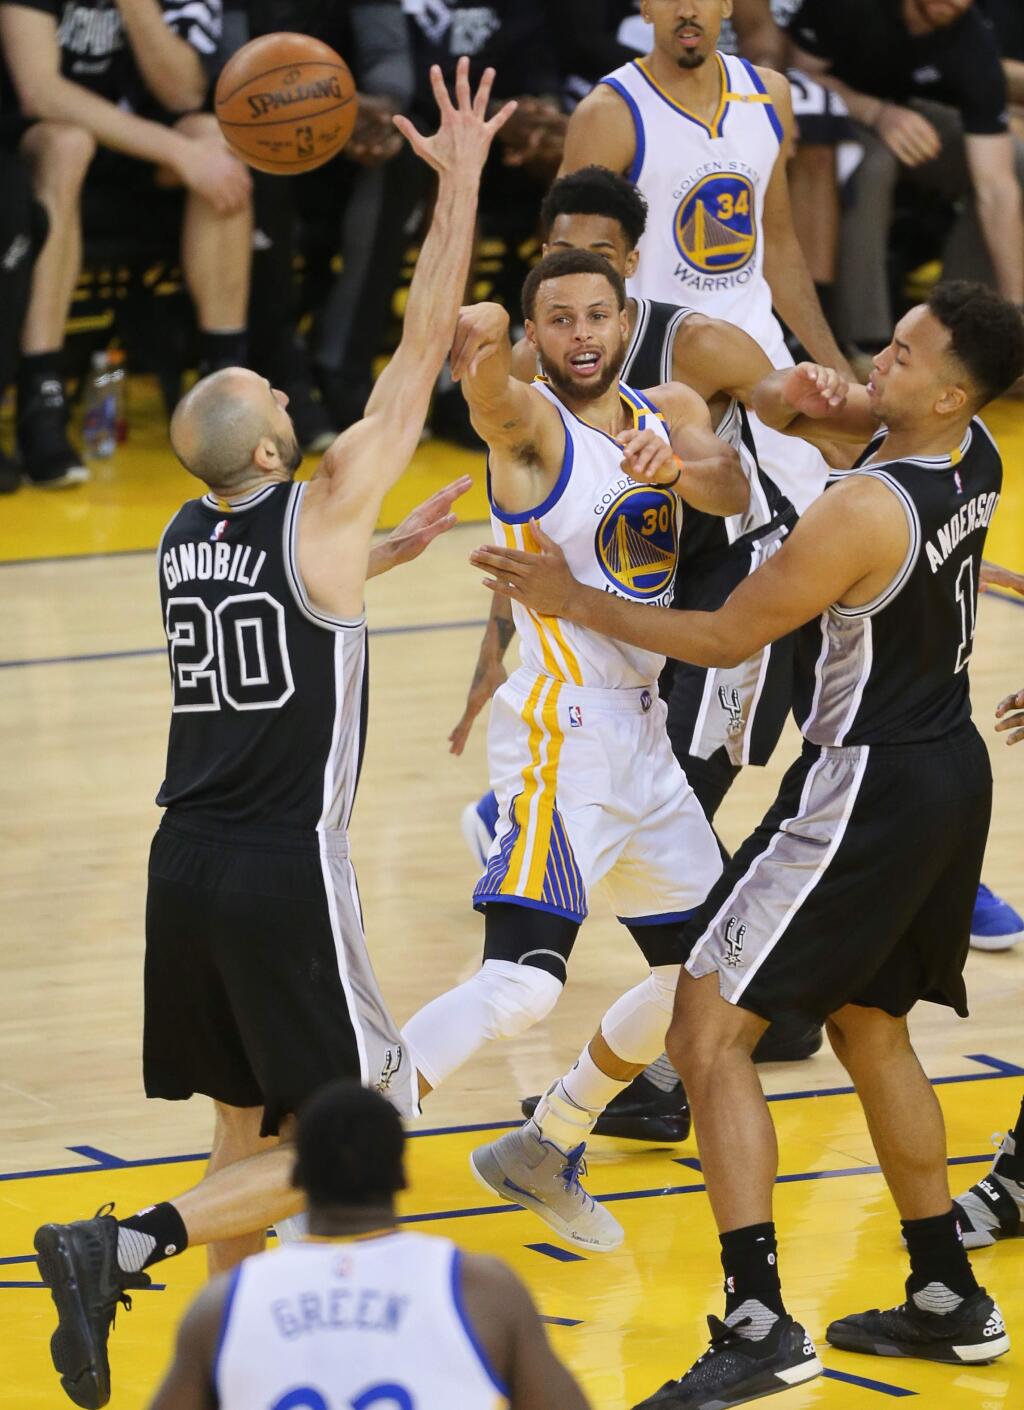 Golden State Warriors guard Stephen Curry passes the ball around San Antonio Spurs guard Manu Ginobili and guard Kyle Anderson, during game 2 of the NBA Western Conference Finals in Oakland on Tuesday, May 16, 2017. (Christopher Chung/ The Press Democrat)